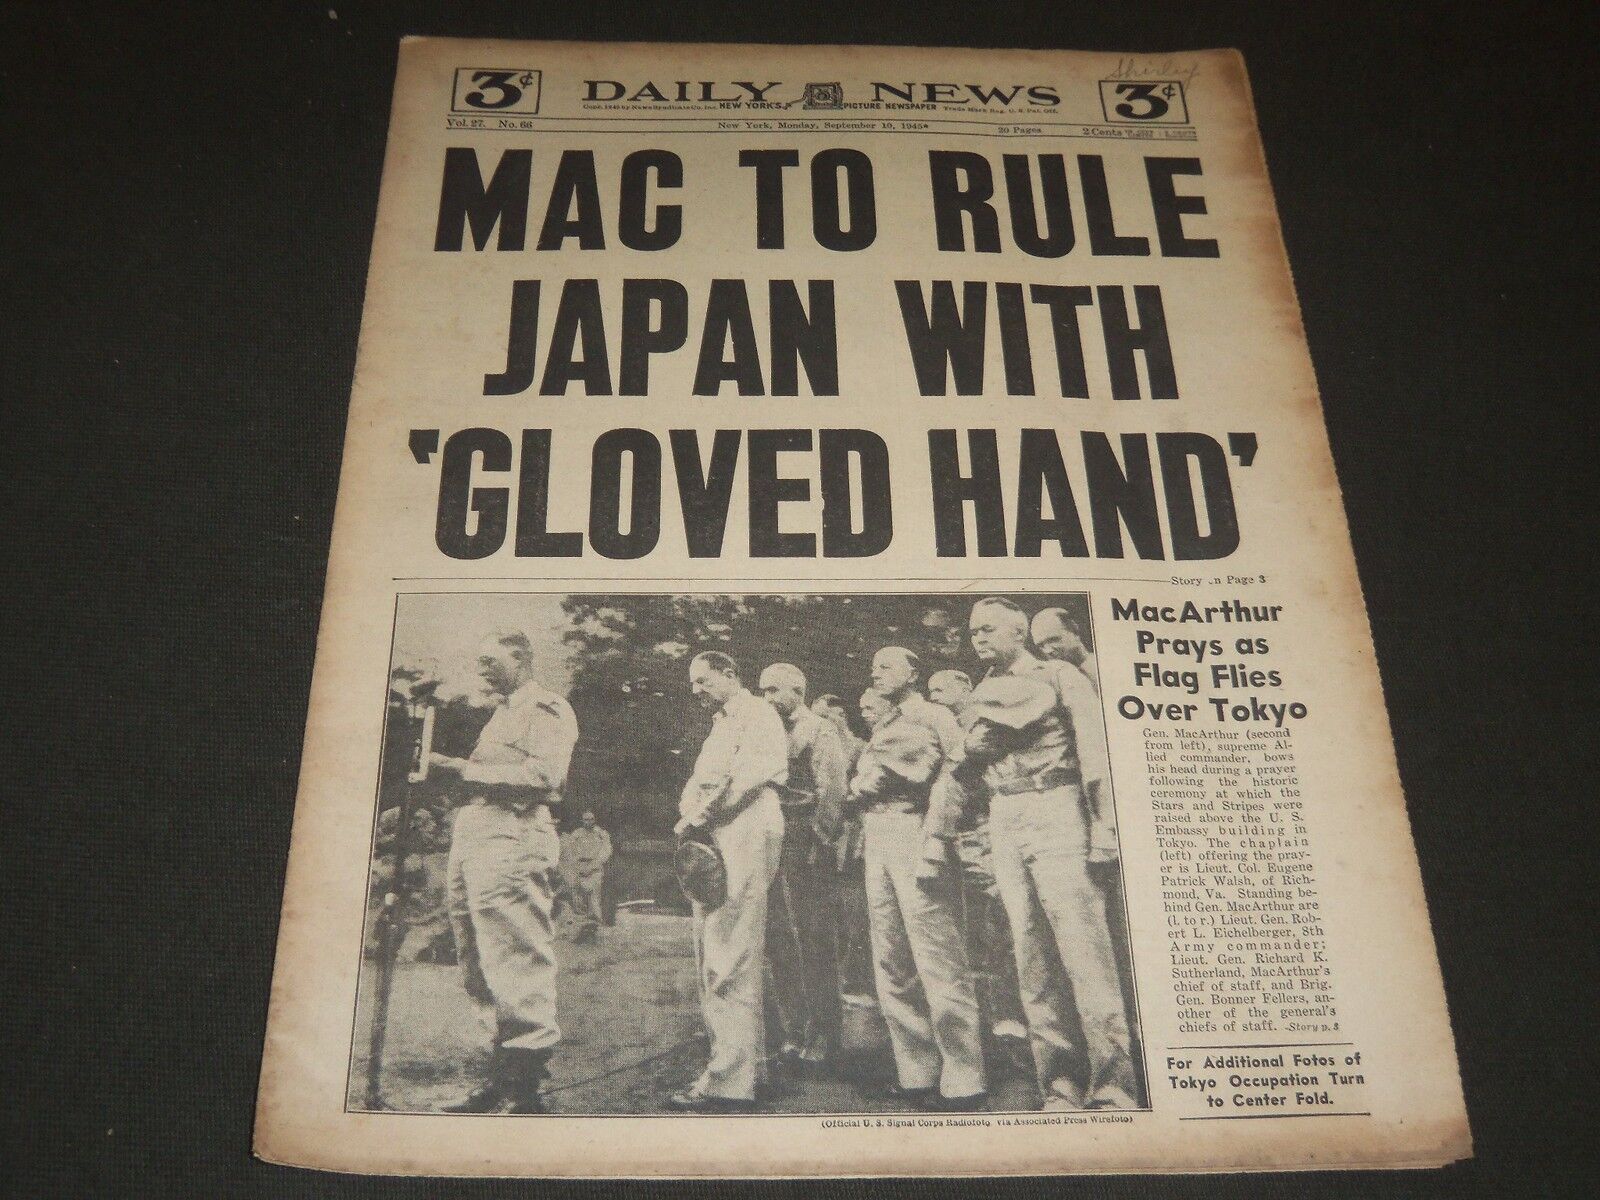 1945 SEPT 10 NEW YORK DAILY NEWS - MAC TO RULE JAPAN WITH GLOVED HAND - NP 2068